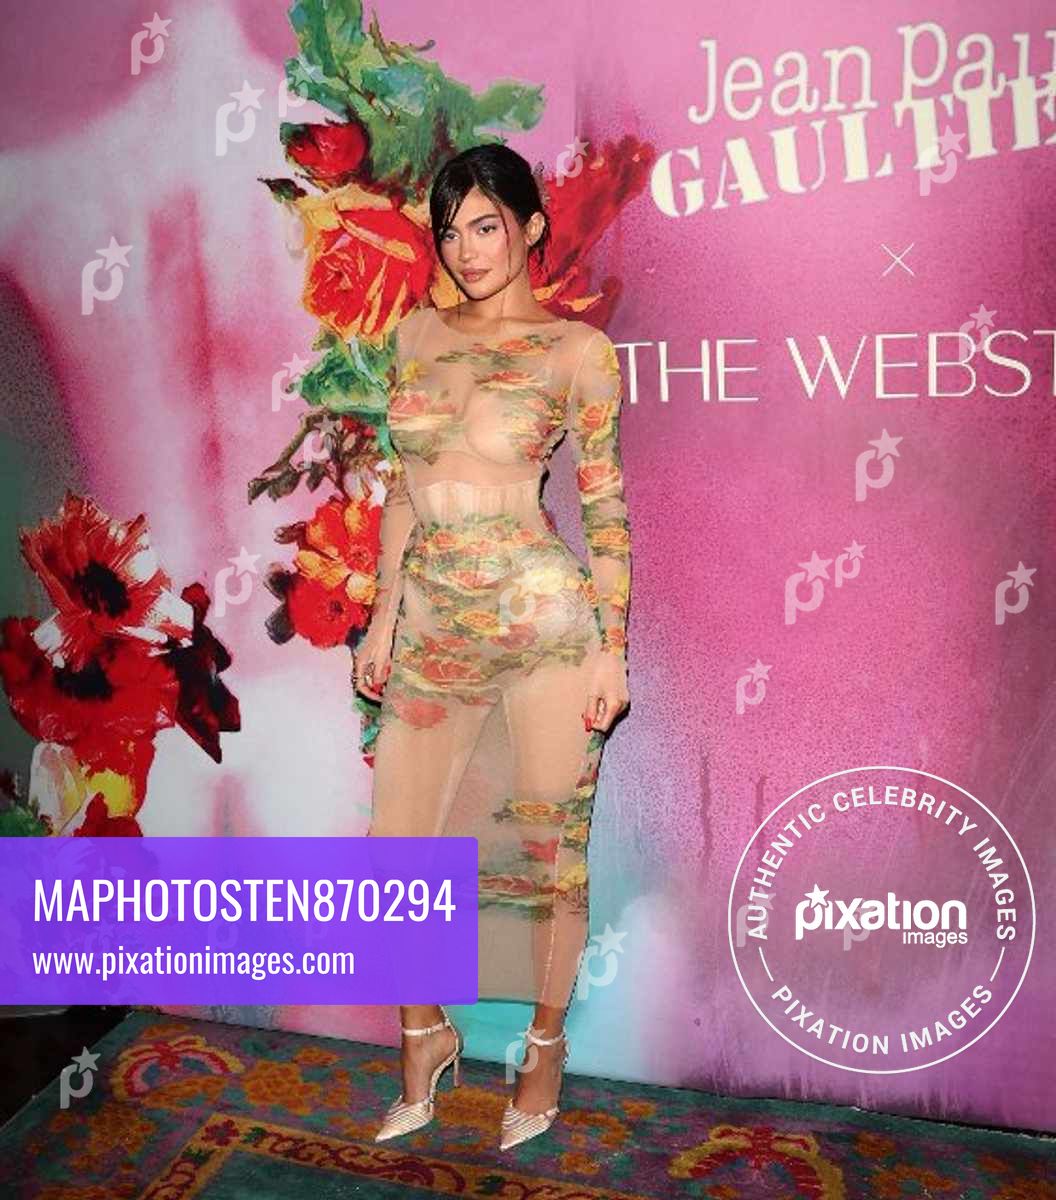 Kylie Jenner attends a private Jean Paul Gaultier party for a collaboration of her daughter Webster x Gaultier in NYC